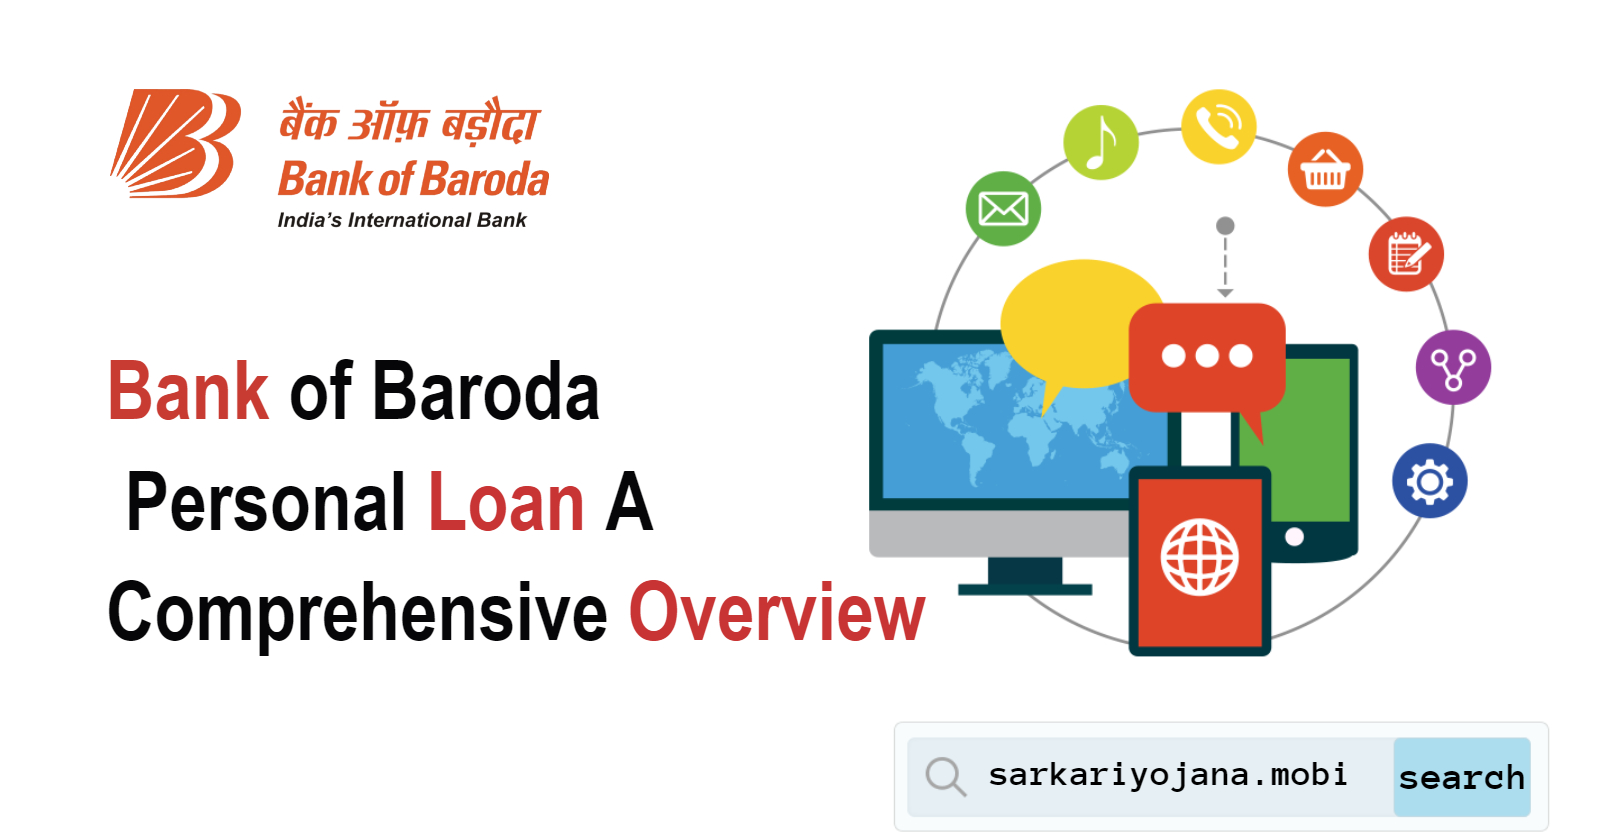 Bank of Baroda Personal Loan A Comprehensive Overview